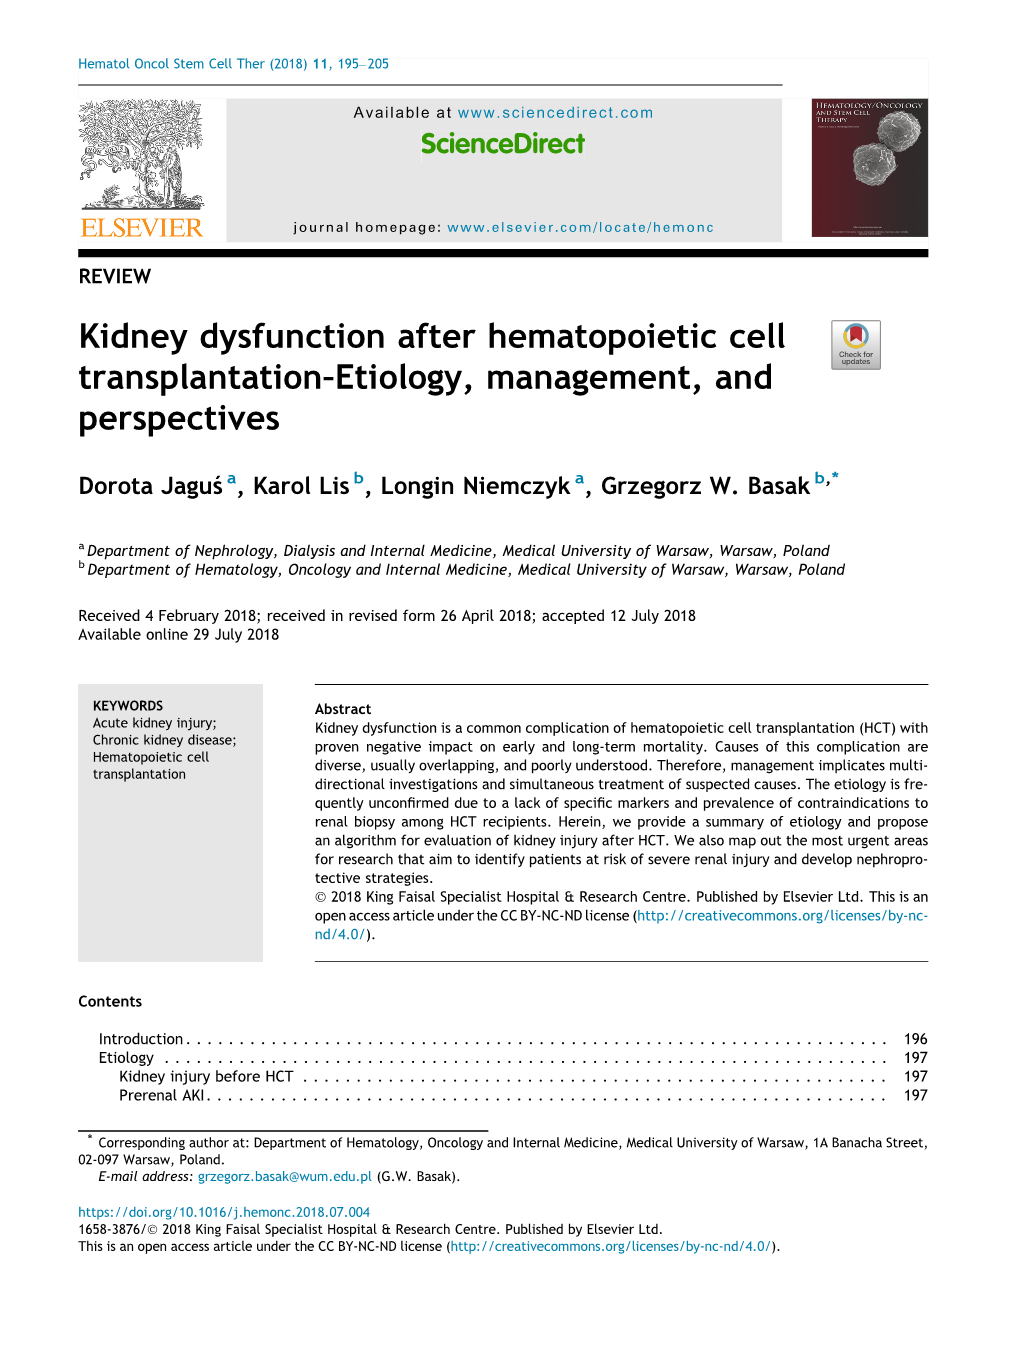 Kidney Dysfunction After Hematopoietic Cell Transplantation—Etiology, Management, and Perspectives